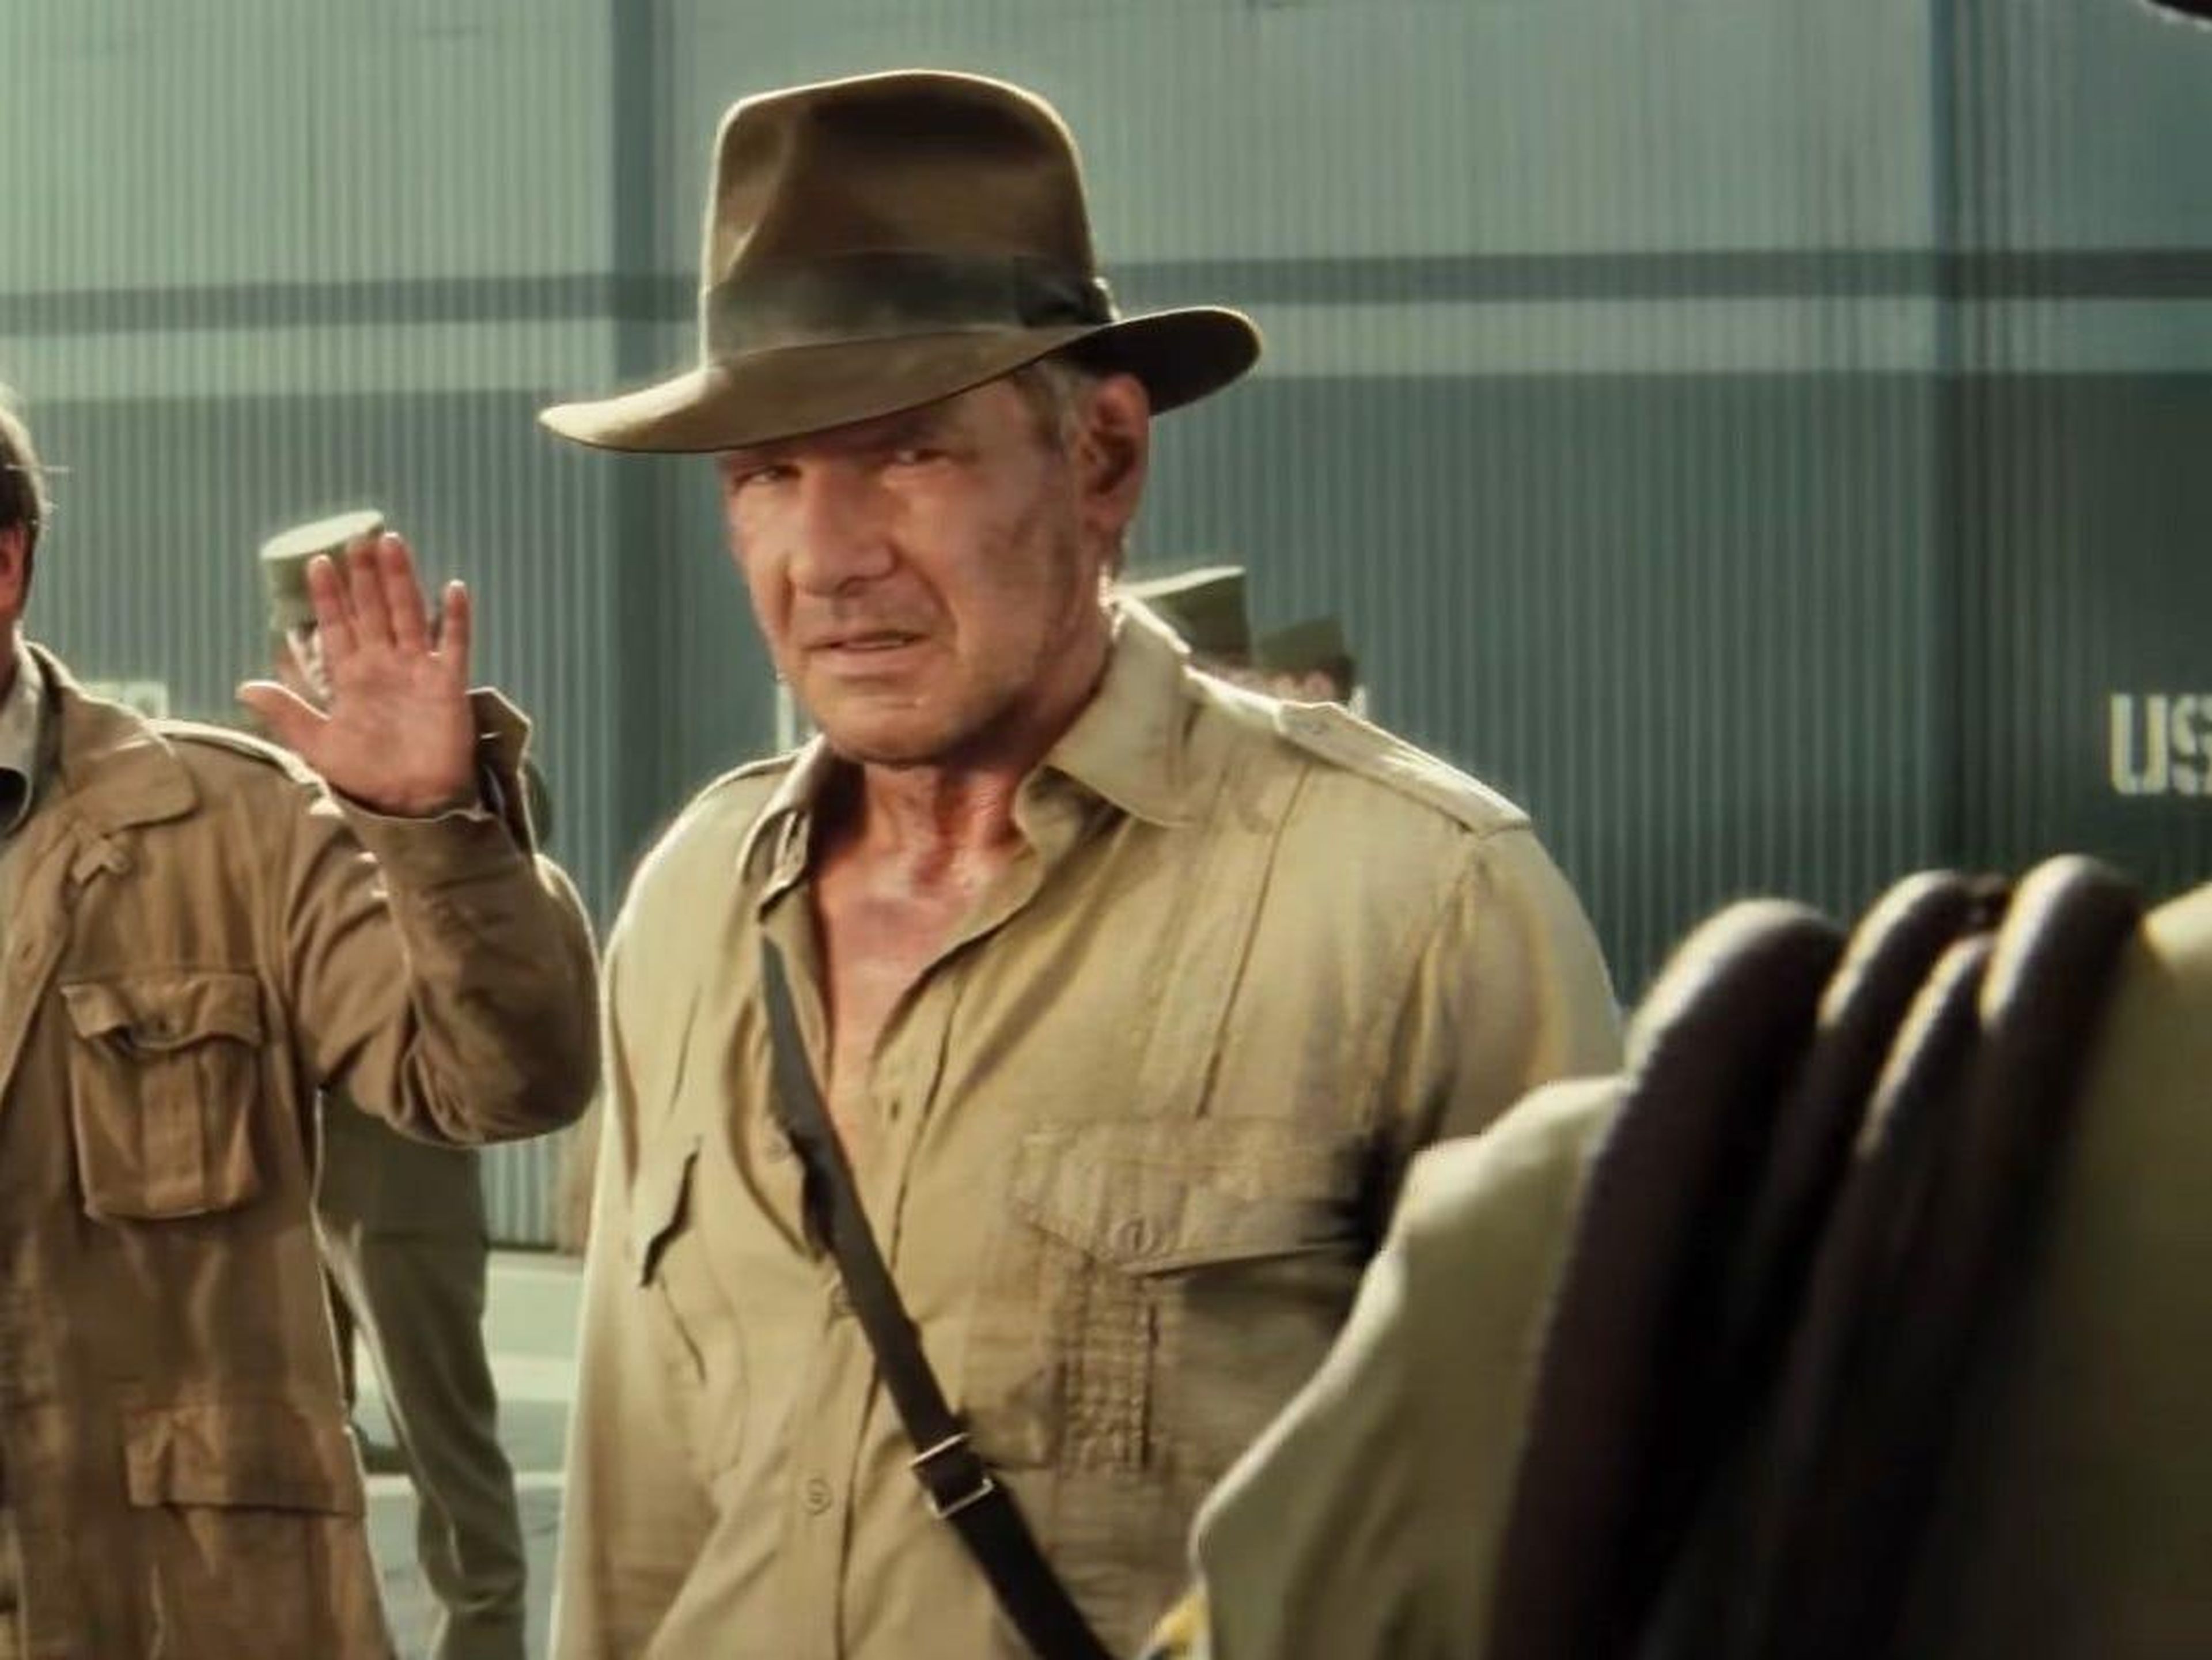 7. Harrison Ford as Indiana Jones in "Indiana Jones and the Kingdom of the Crystal Skull"